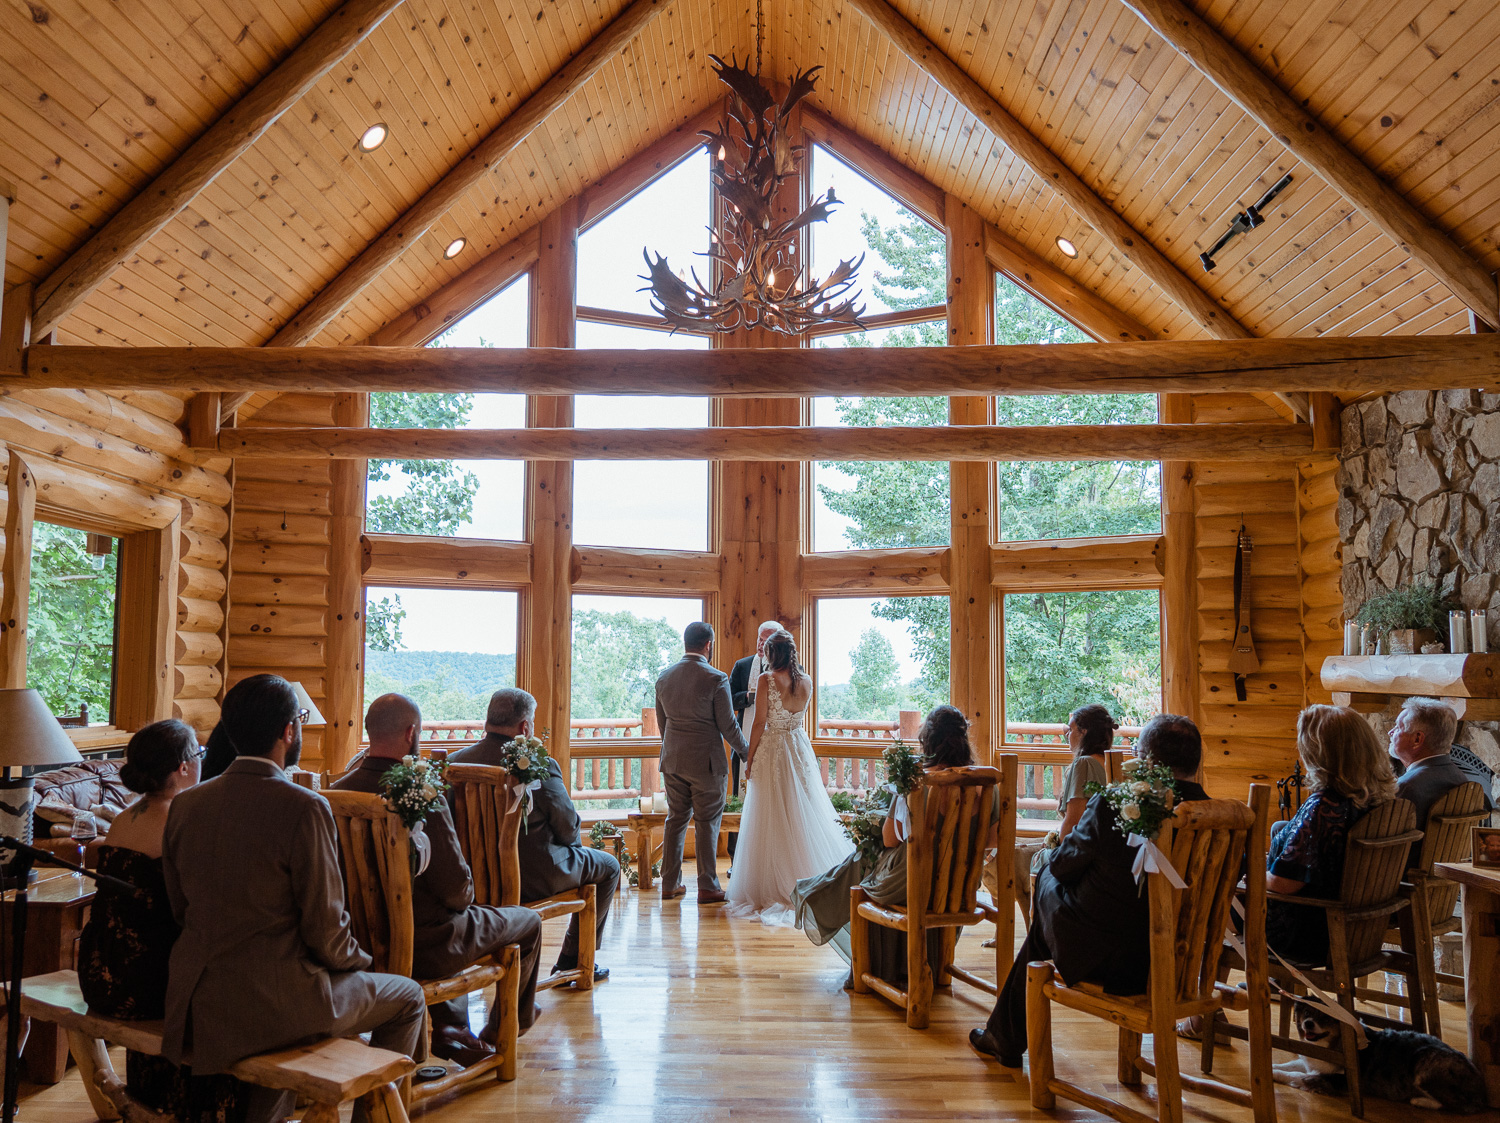 Bride and Groom hold hands during their elopement ceremony in a log cabin ceremony surrounded by loved ones